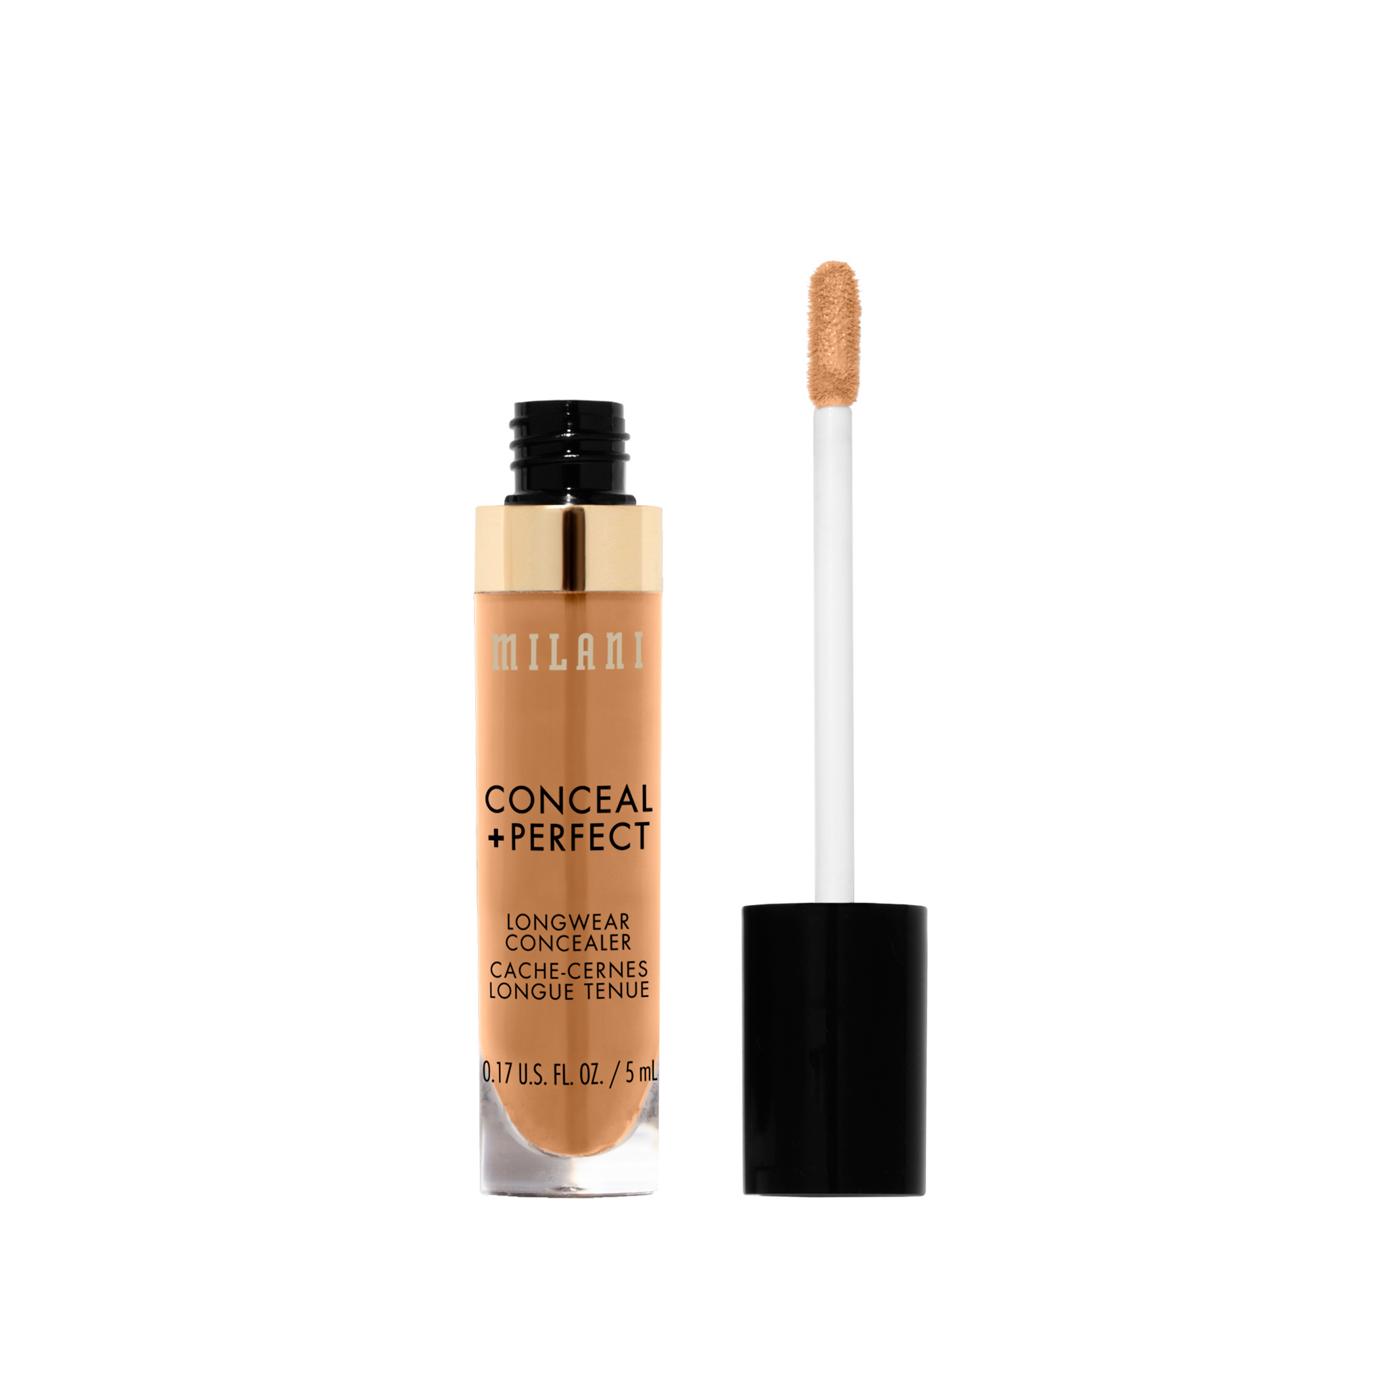 Milani Conceal +Perfect Longwear Concealer - Cool Sand; image 8 of 9